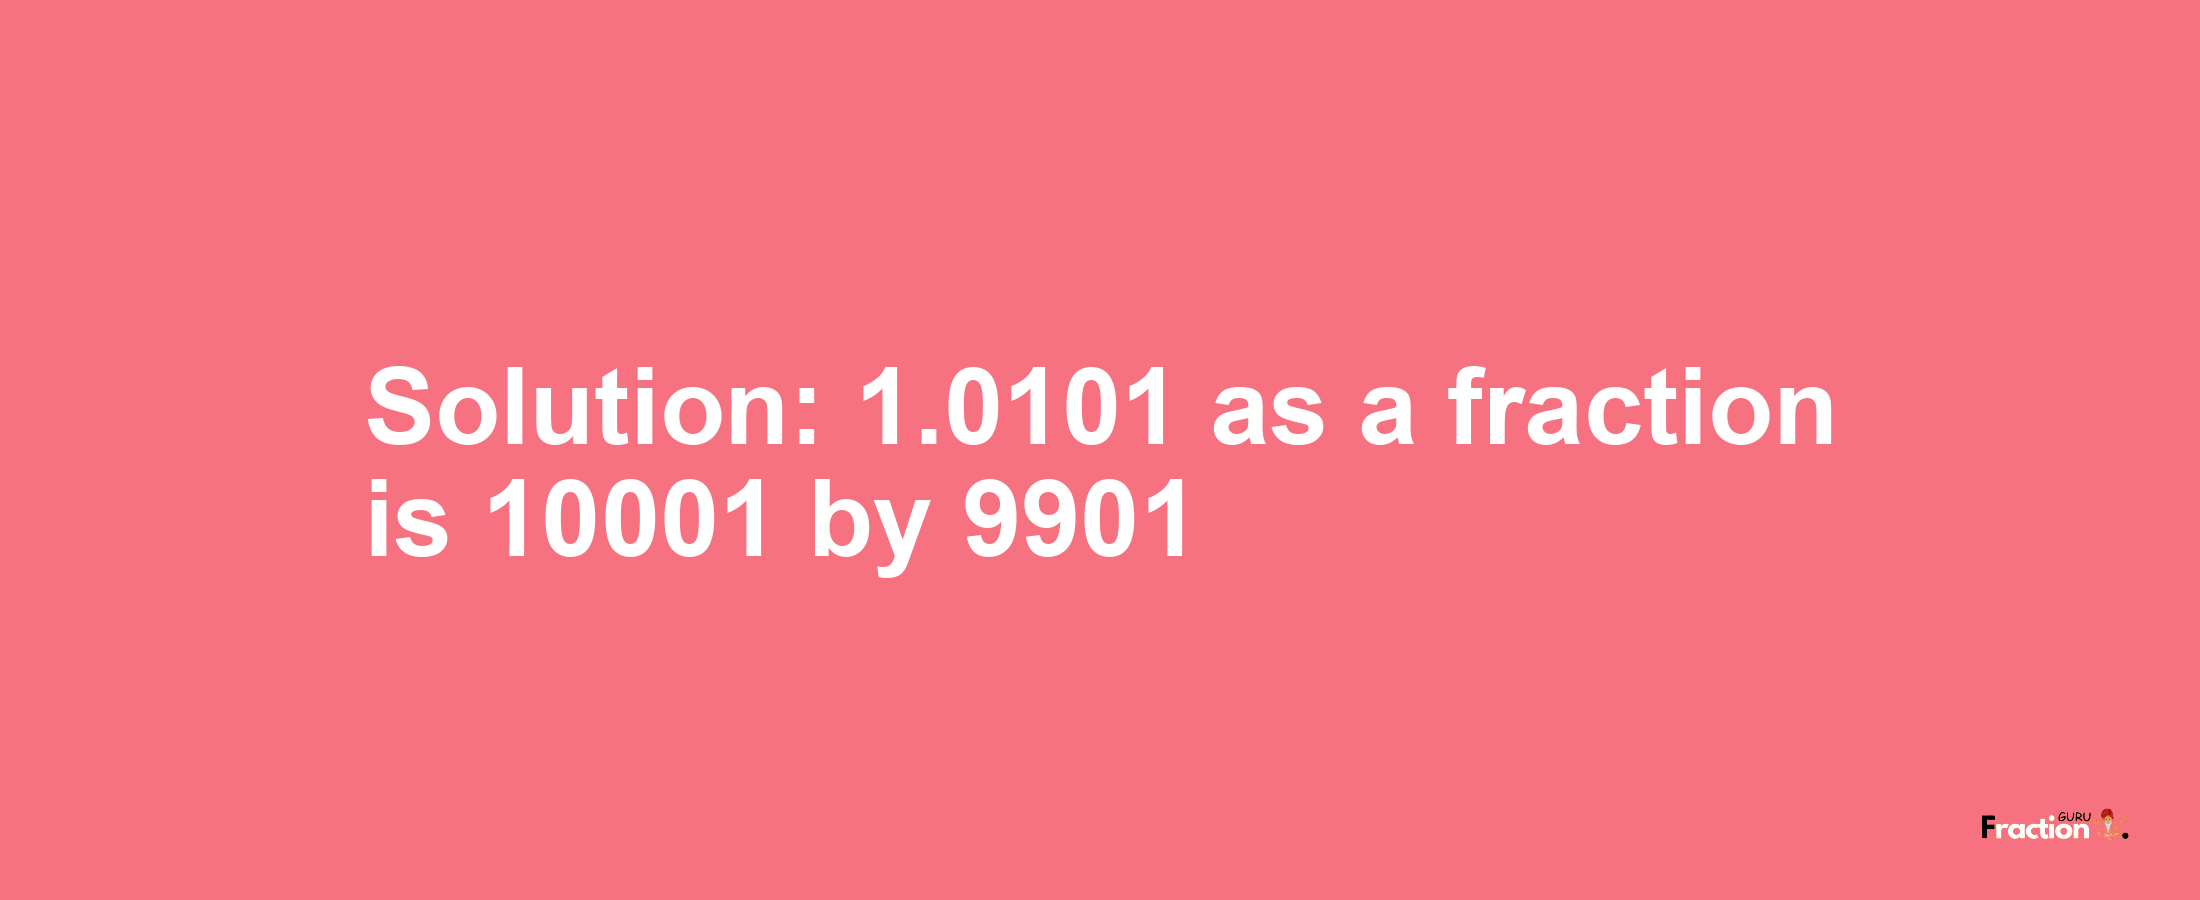 Solution:1.0101 as a fraction is 10001/9901